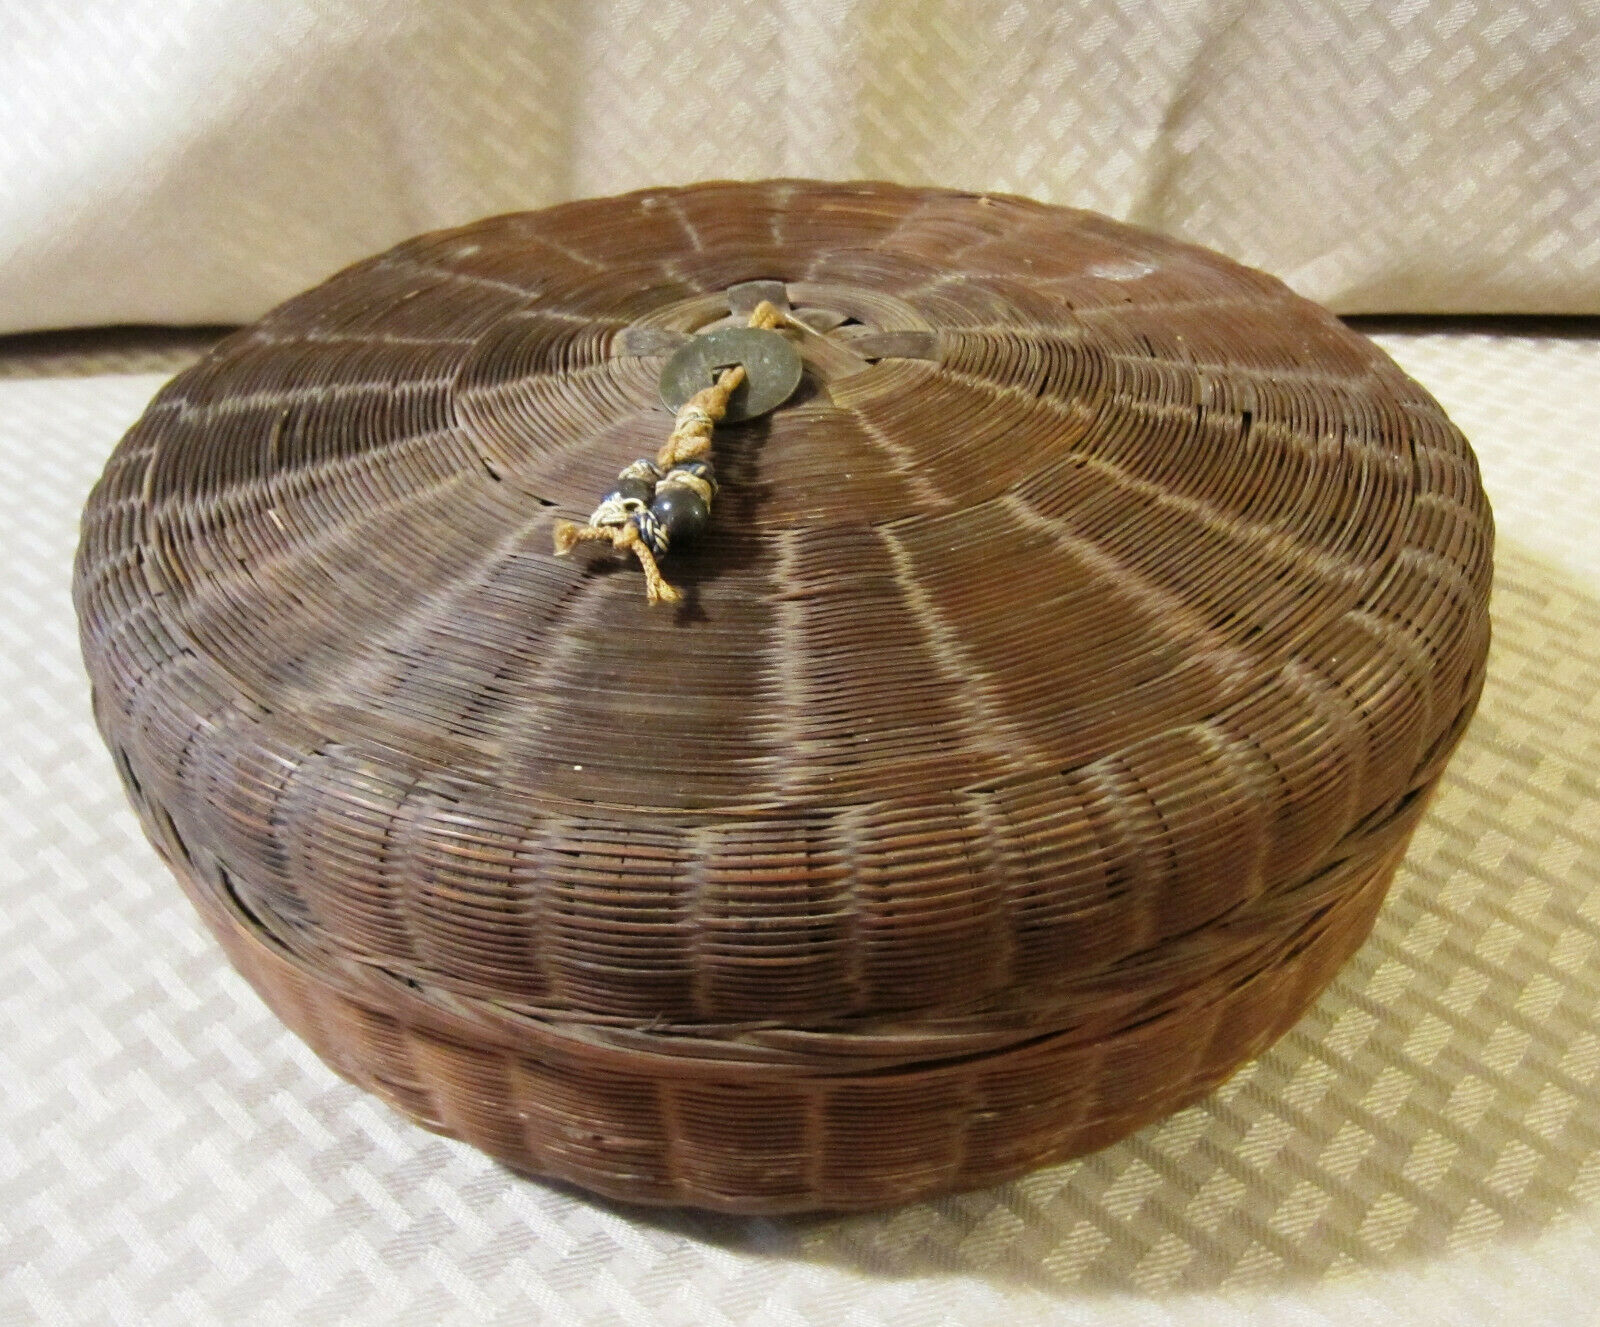 Large Antique Wicker Chinese Sewing Basket With Coin Ornamentation